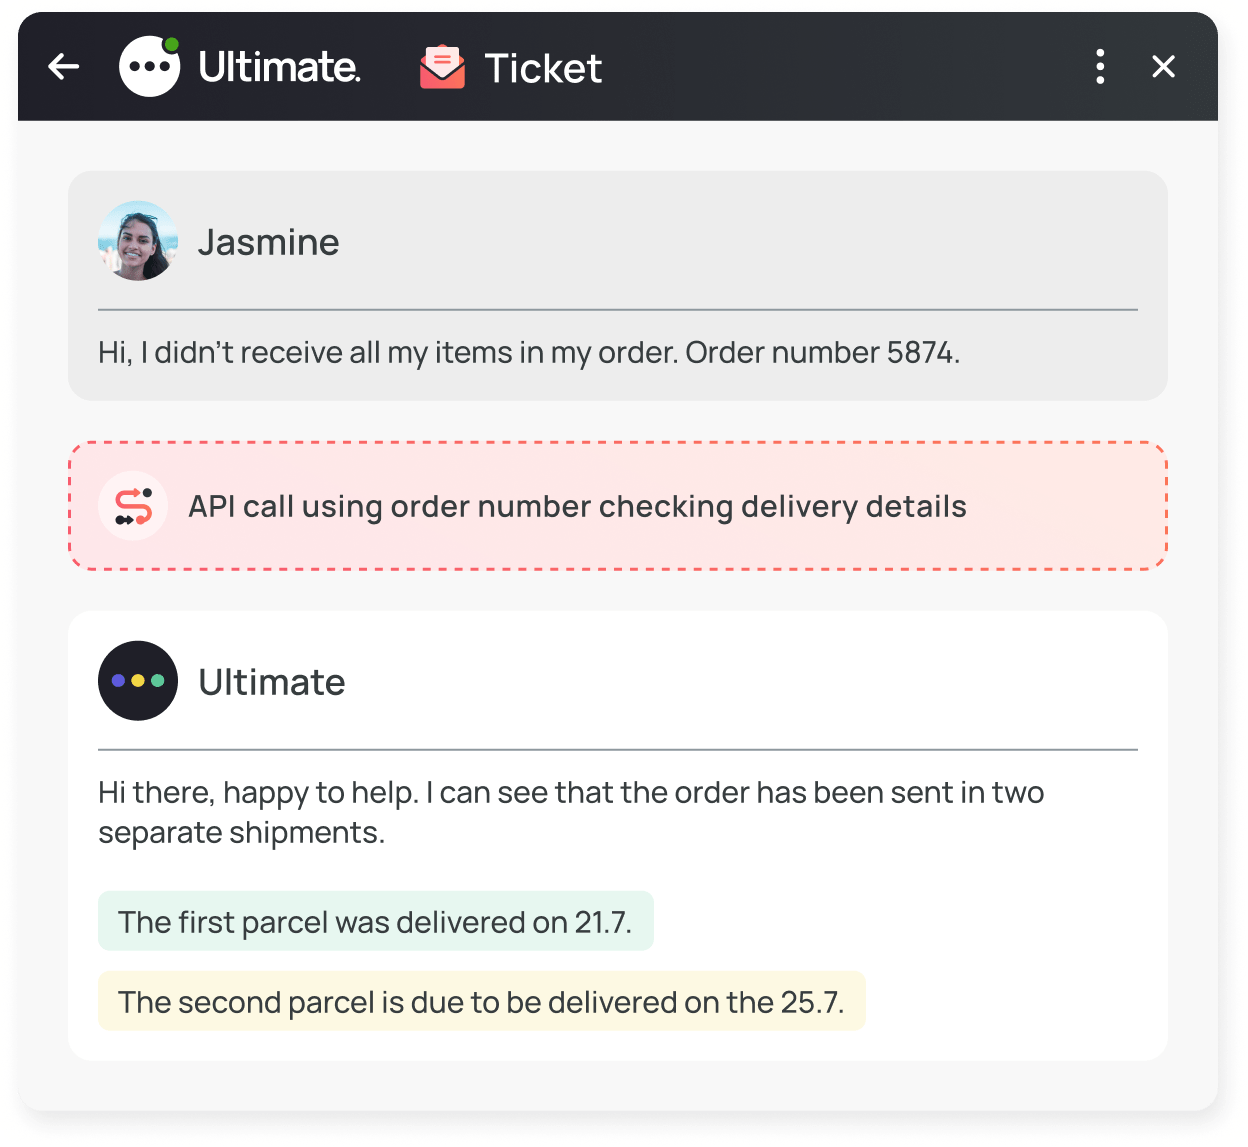 A customer didn't receive the items in her order, and an API is used to check the delivery status of the item. Ultimate's chatbot is then able to provide the customer with the whereabouts of her parcel.